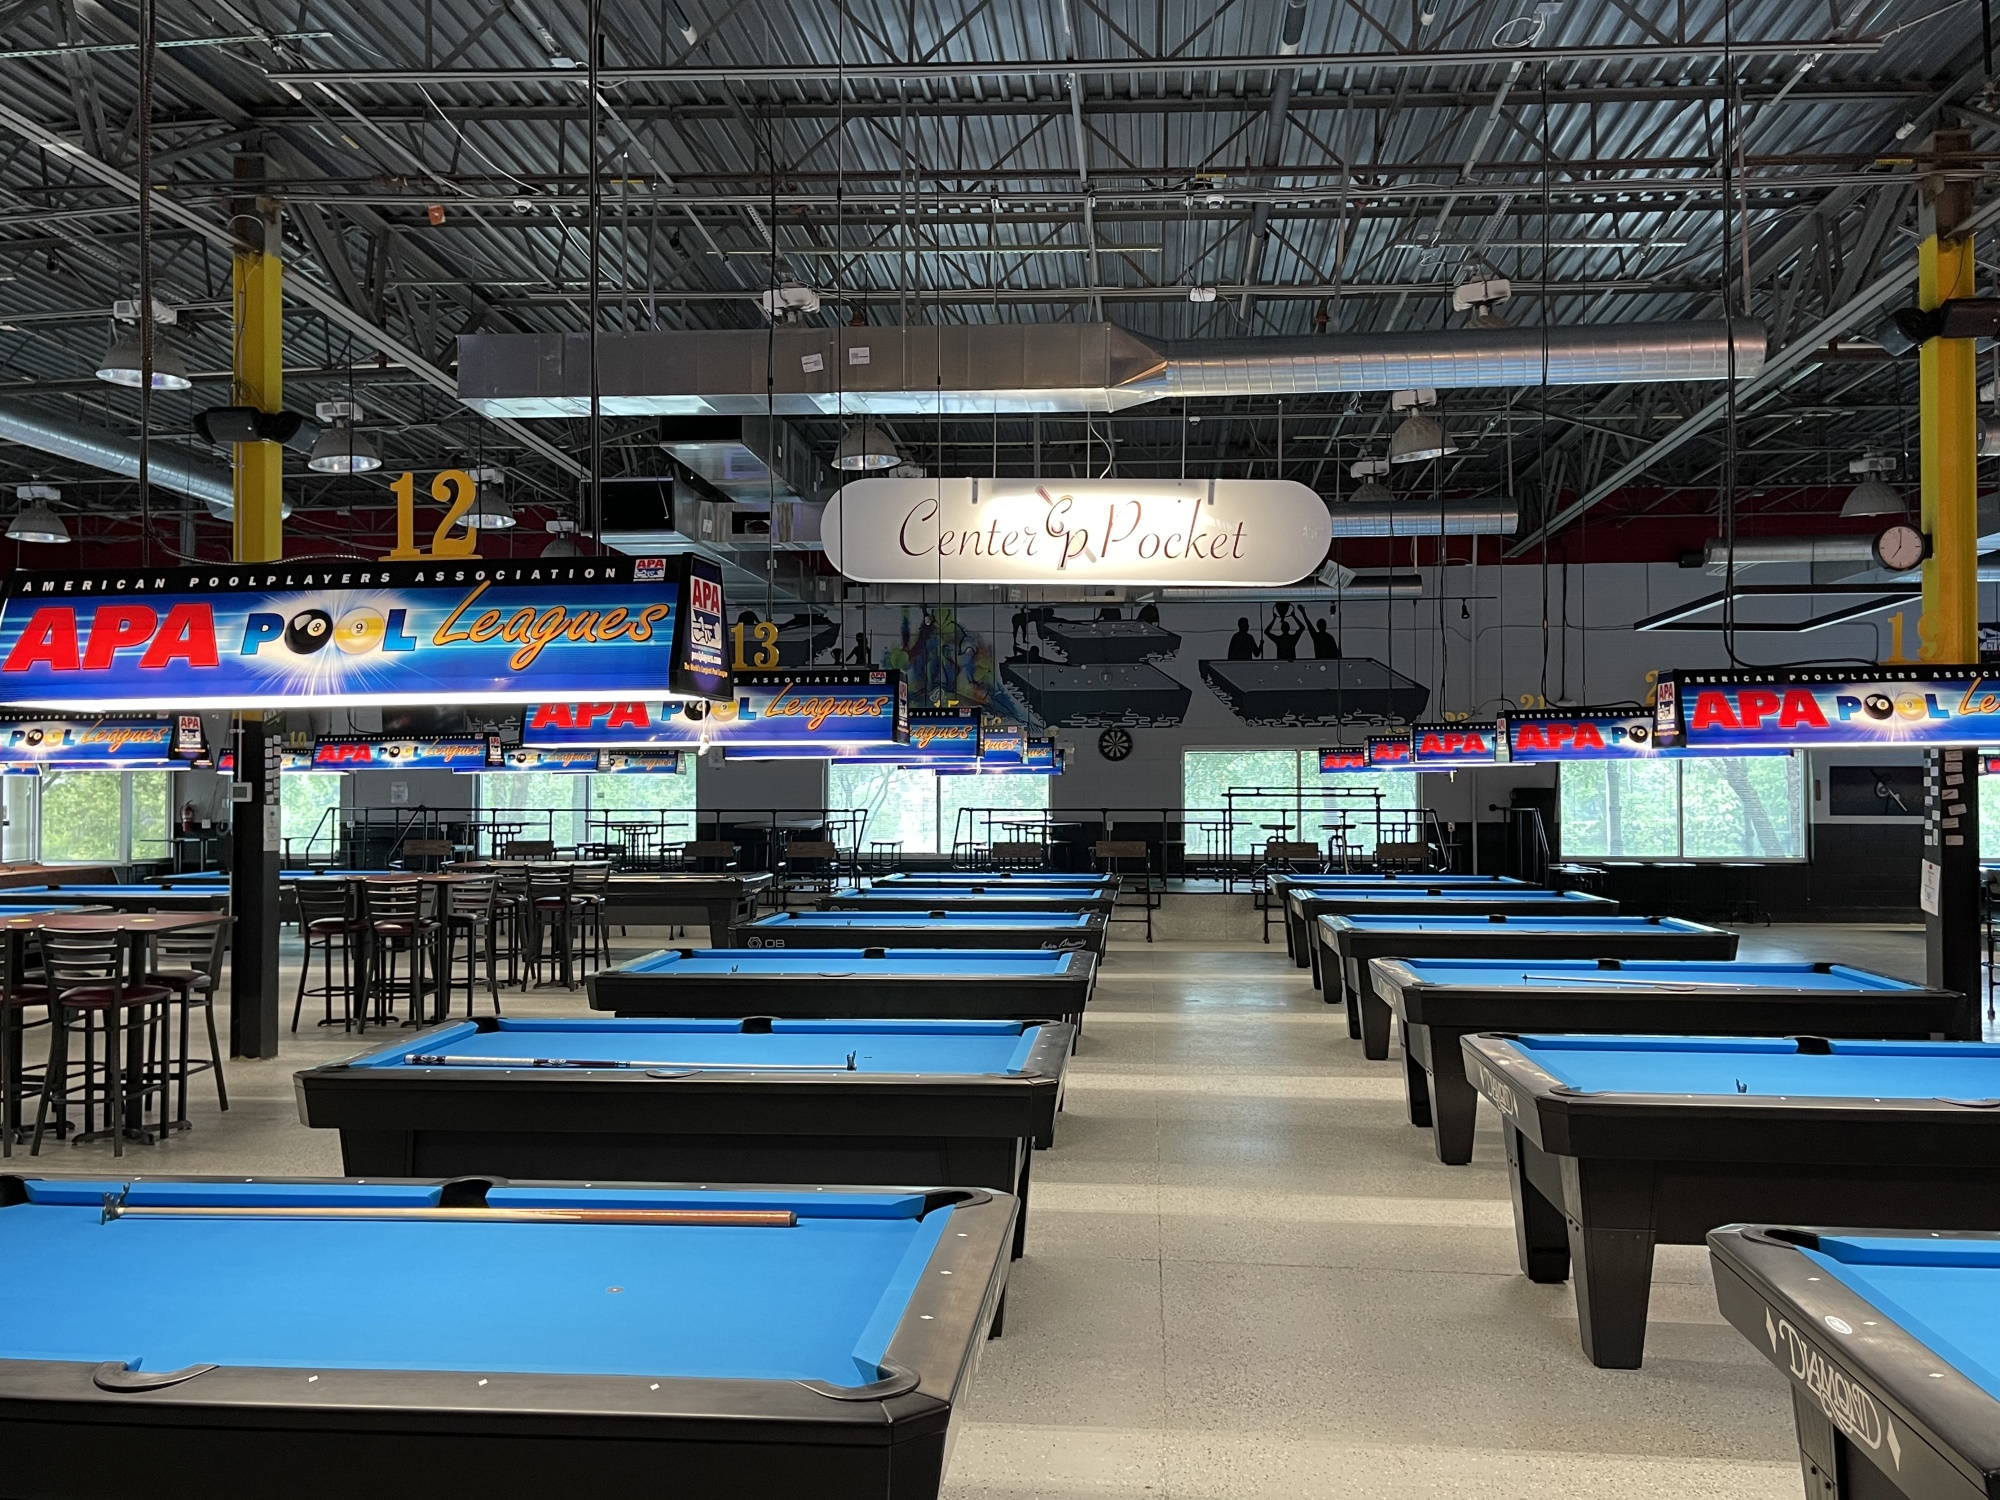 Interior of Center Pocket, with rows of pool tables